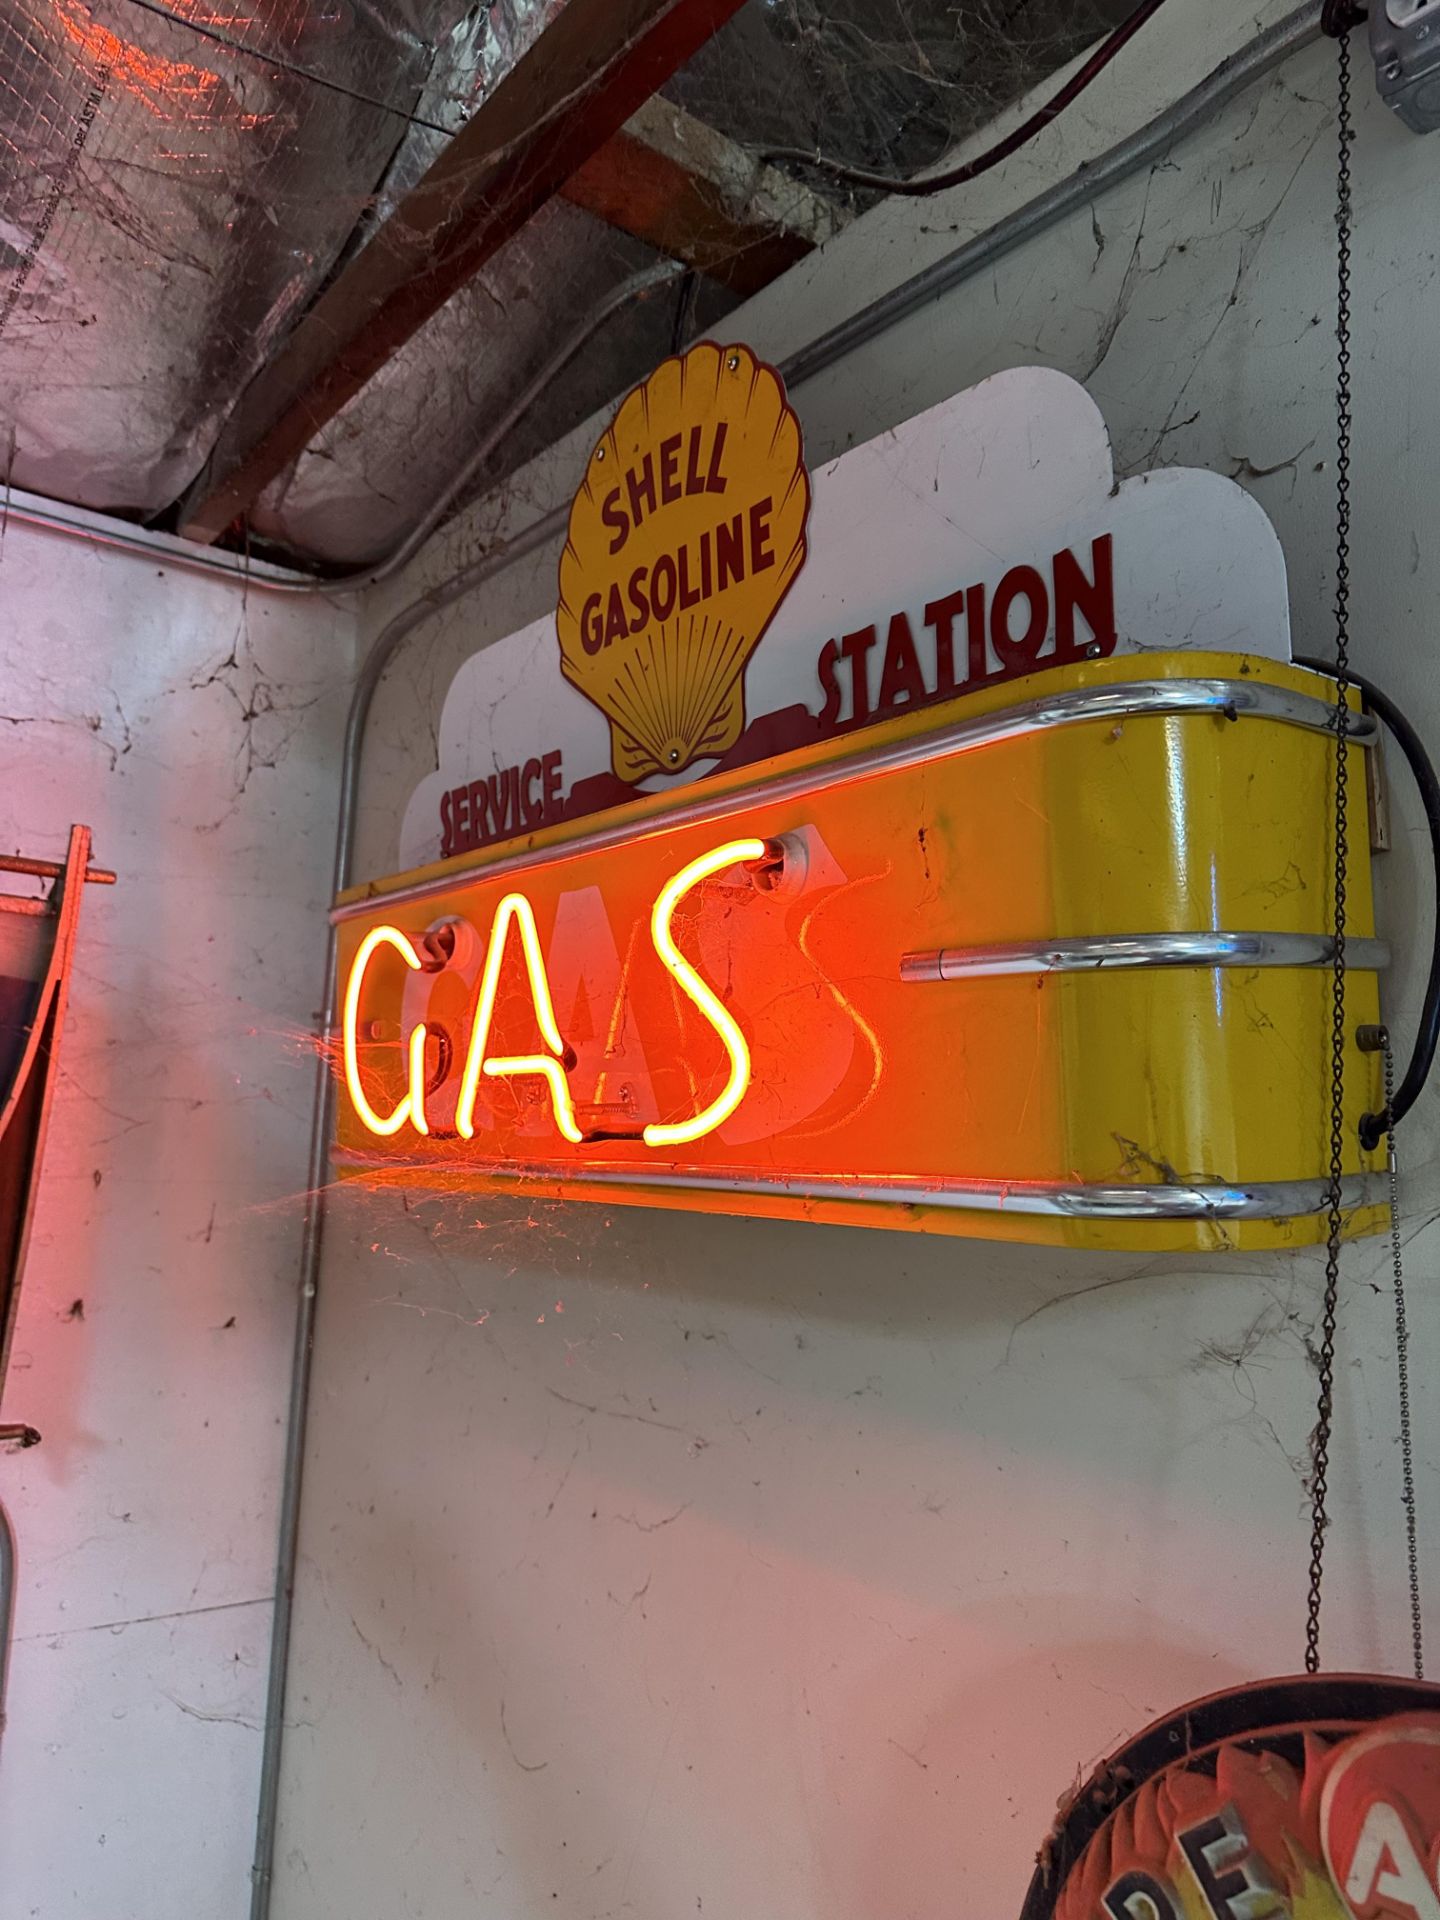 Hamms, shell gas, ace clock used ok cars neon signs - Image 3 of 3